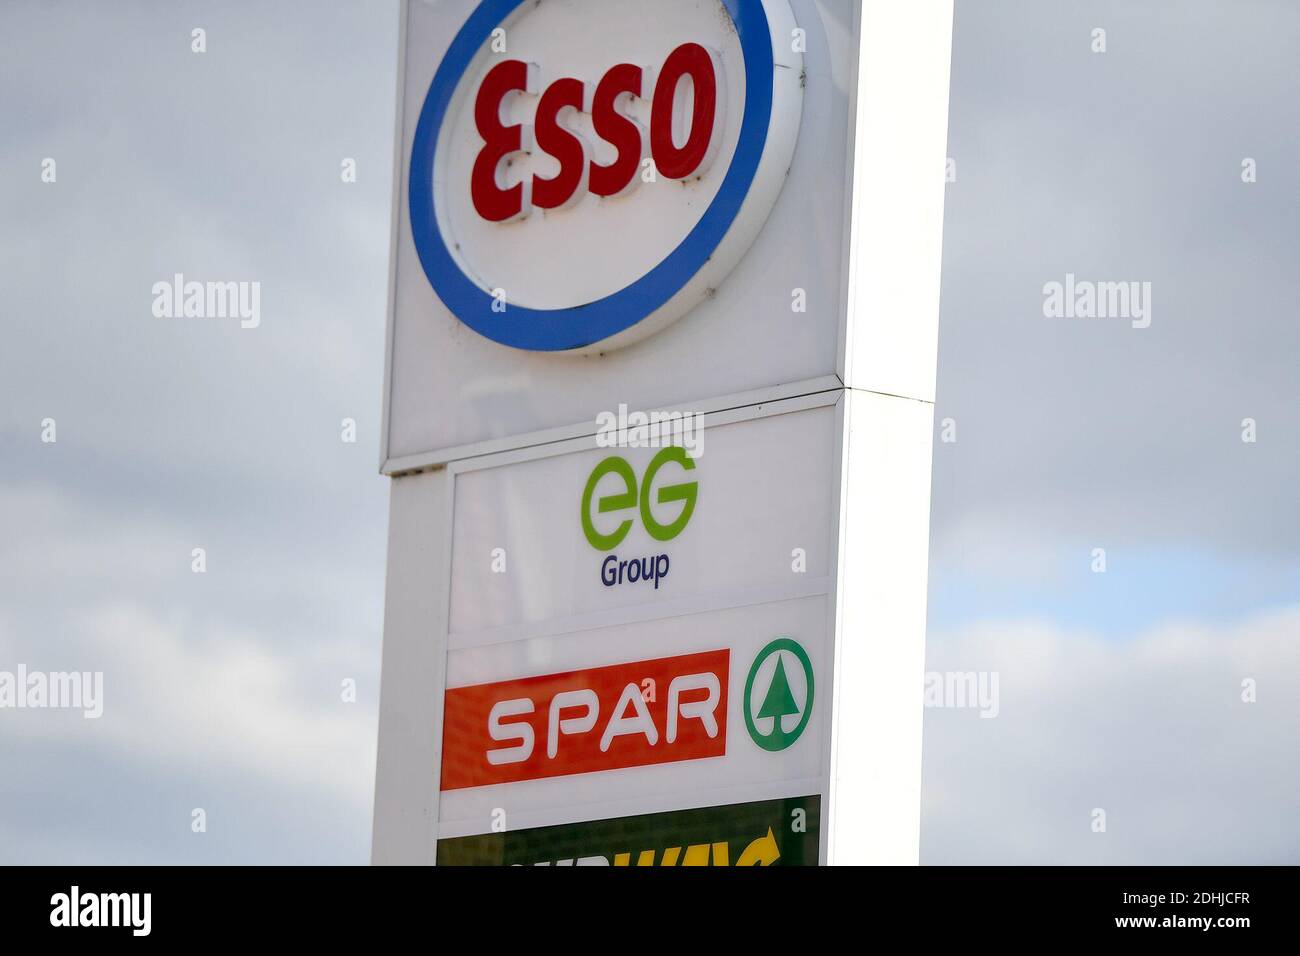 GV of ESSO SPAR Euro Garages on Brandlesholme Road, Bury, Thursday 1st October 2020. Supermarket chain Asda is to be sold to two brothers from Blackburn in a deal worth £6.8bn.  The new owners, Mohsin and Zuber Issa, who have backed by investment firm TDR Capital, founded their Euro Garages business in 2001 with a single petrol station in Bury which they bought for £150,000. The business now has around sites in Europe, the United States and Australia and annual sales of around £18bn. Stock Photo